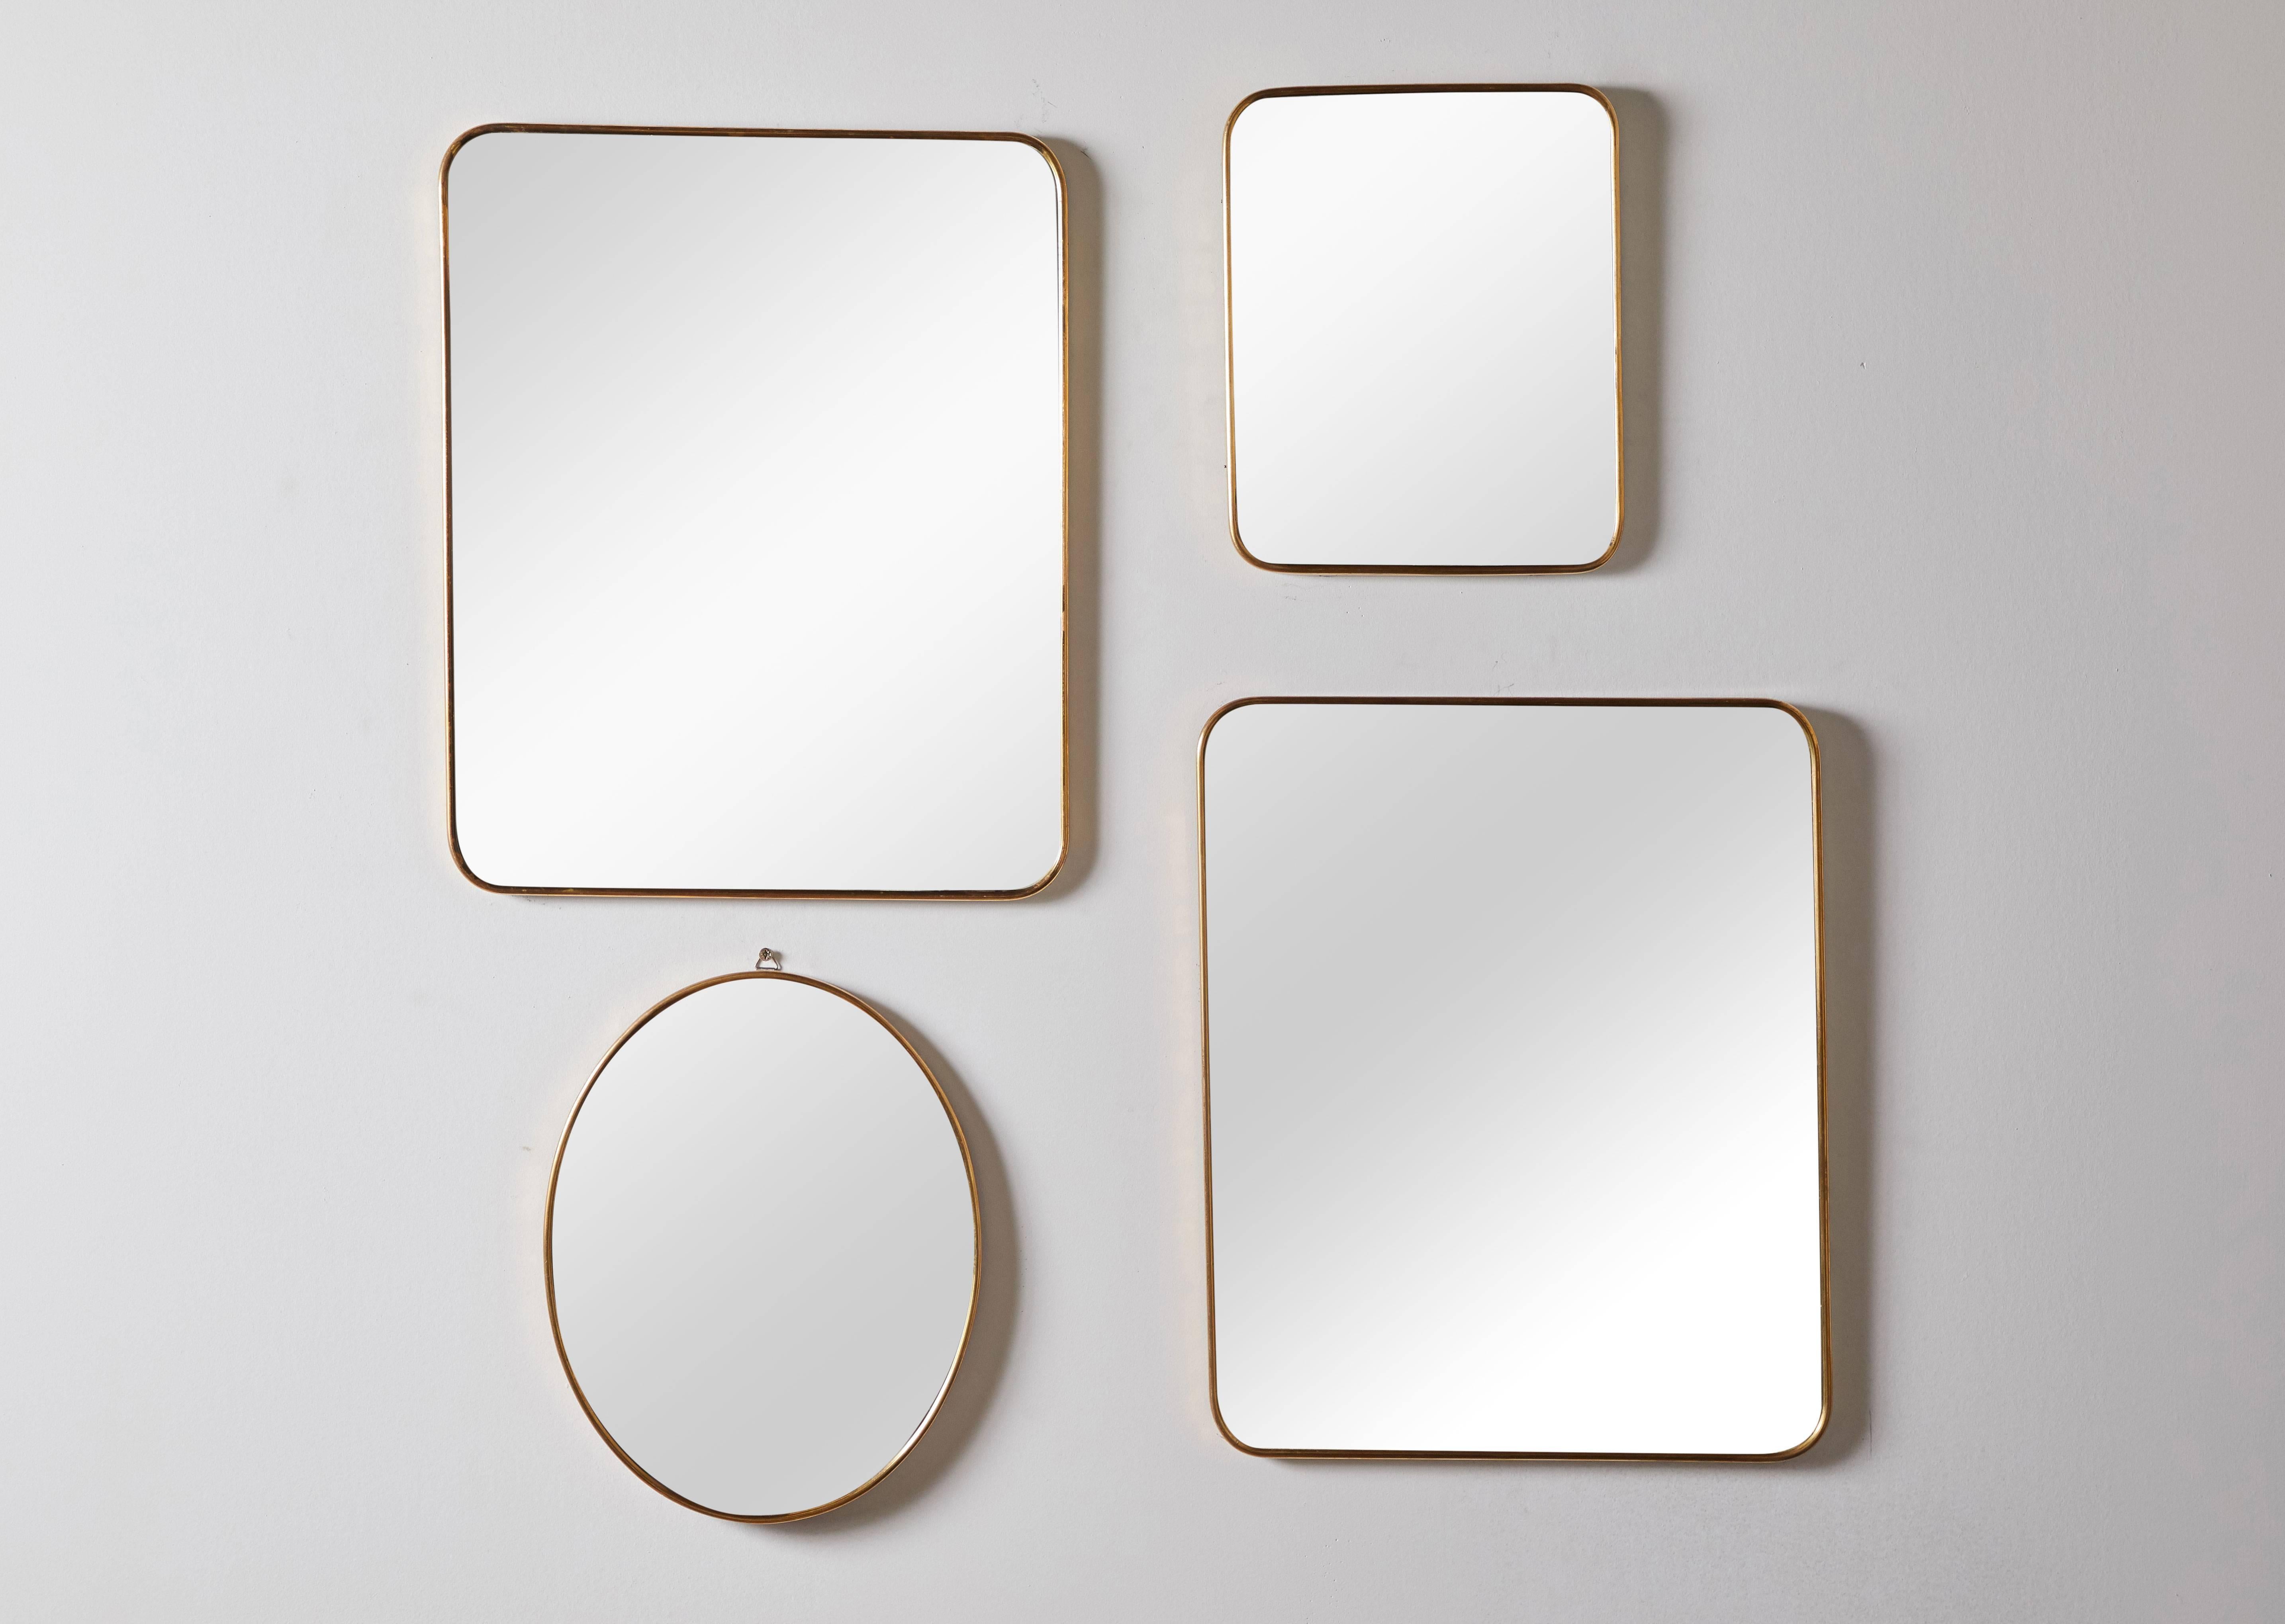 Italian brass framed wall mirrors. Made in Italy circa 1960s. Each item is sold separately. Dimensions and prices vary.  Dimensions:
Large Rectangular (2) 16.5” H x 13.5 W x .5” D $1800
Small Rectangular 10.5” H x 8.5” W x .5” D $1400
Oval 12” H x